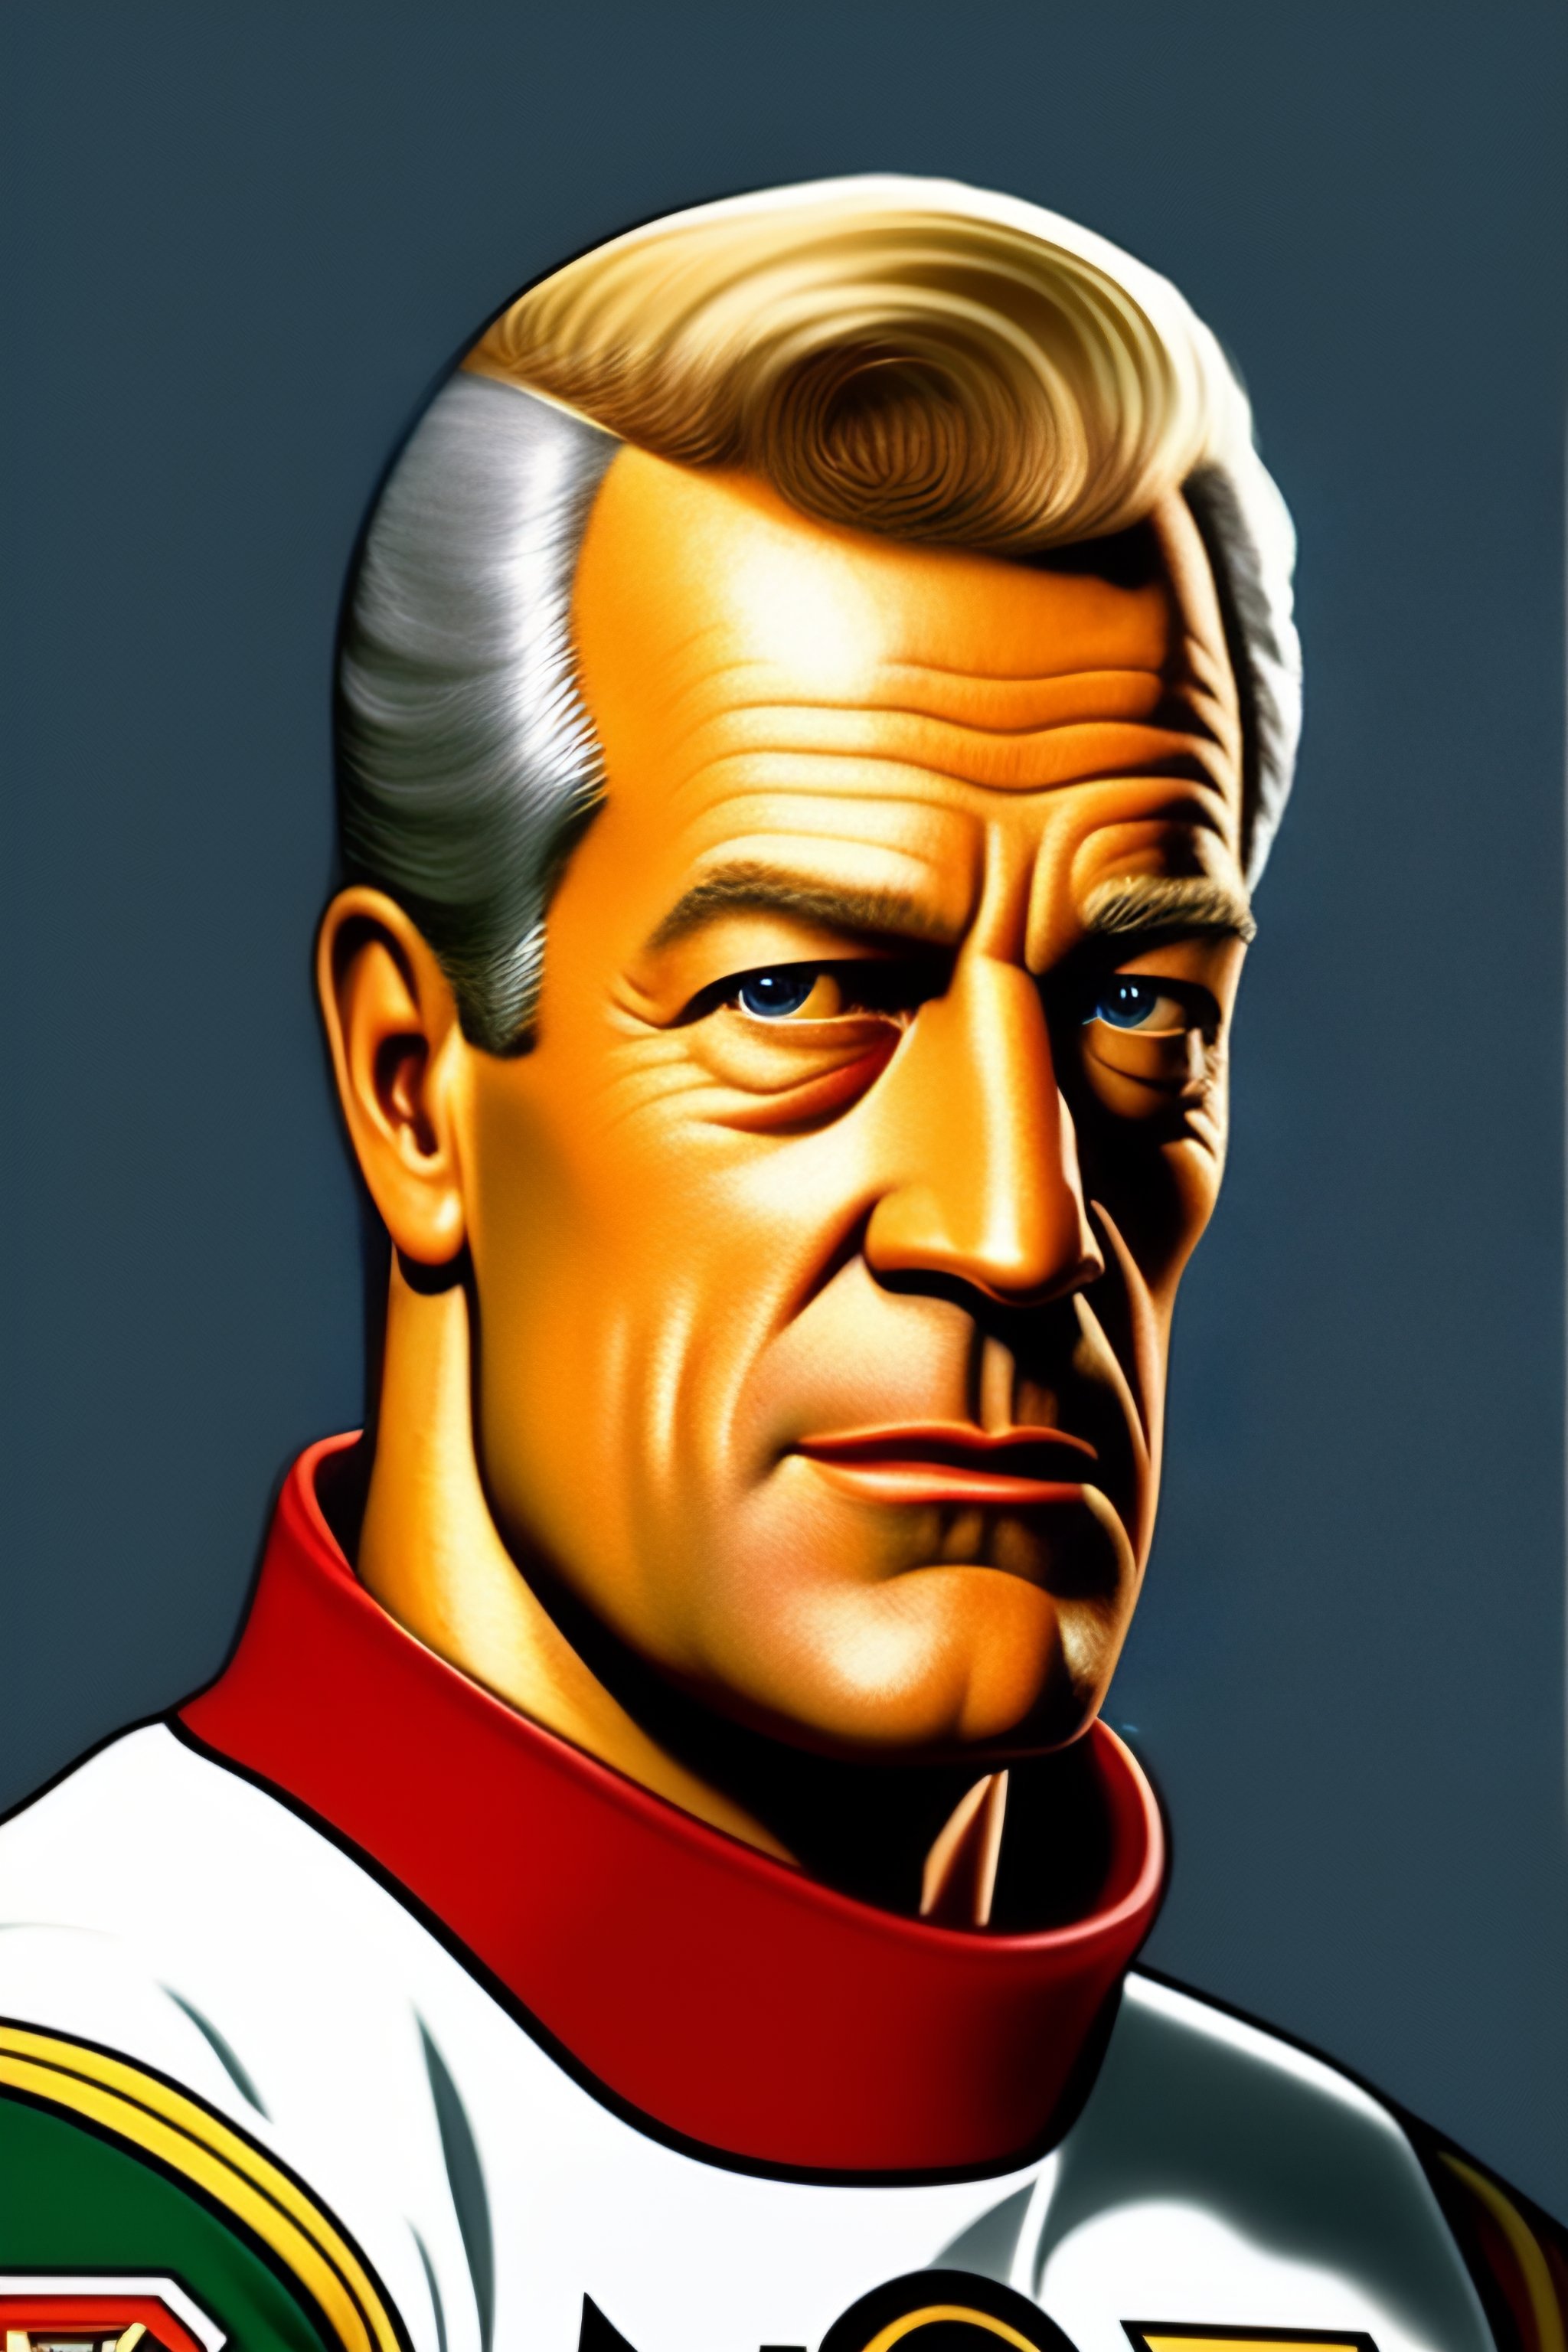 Lexica - Gordie Howe as a 2d simpsons character